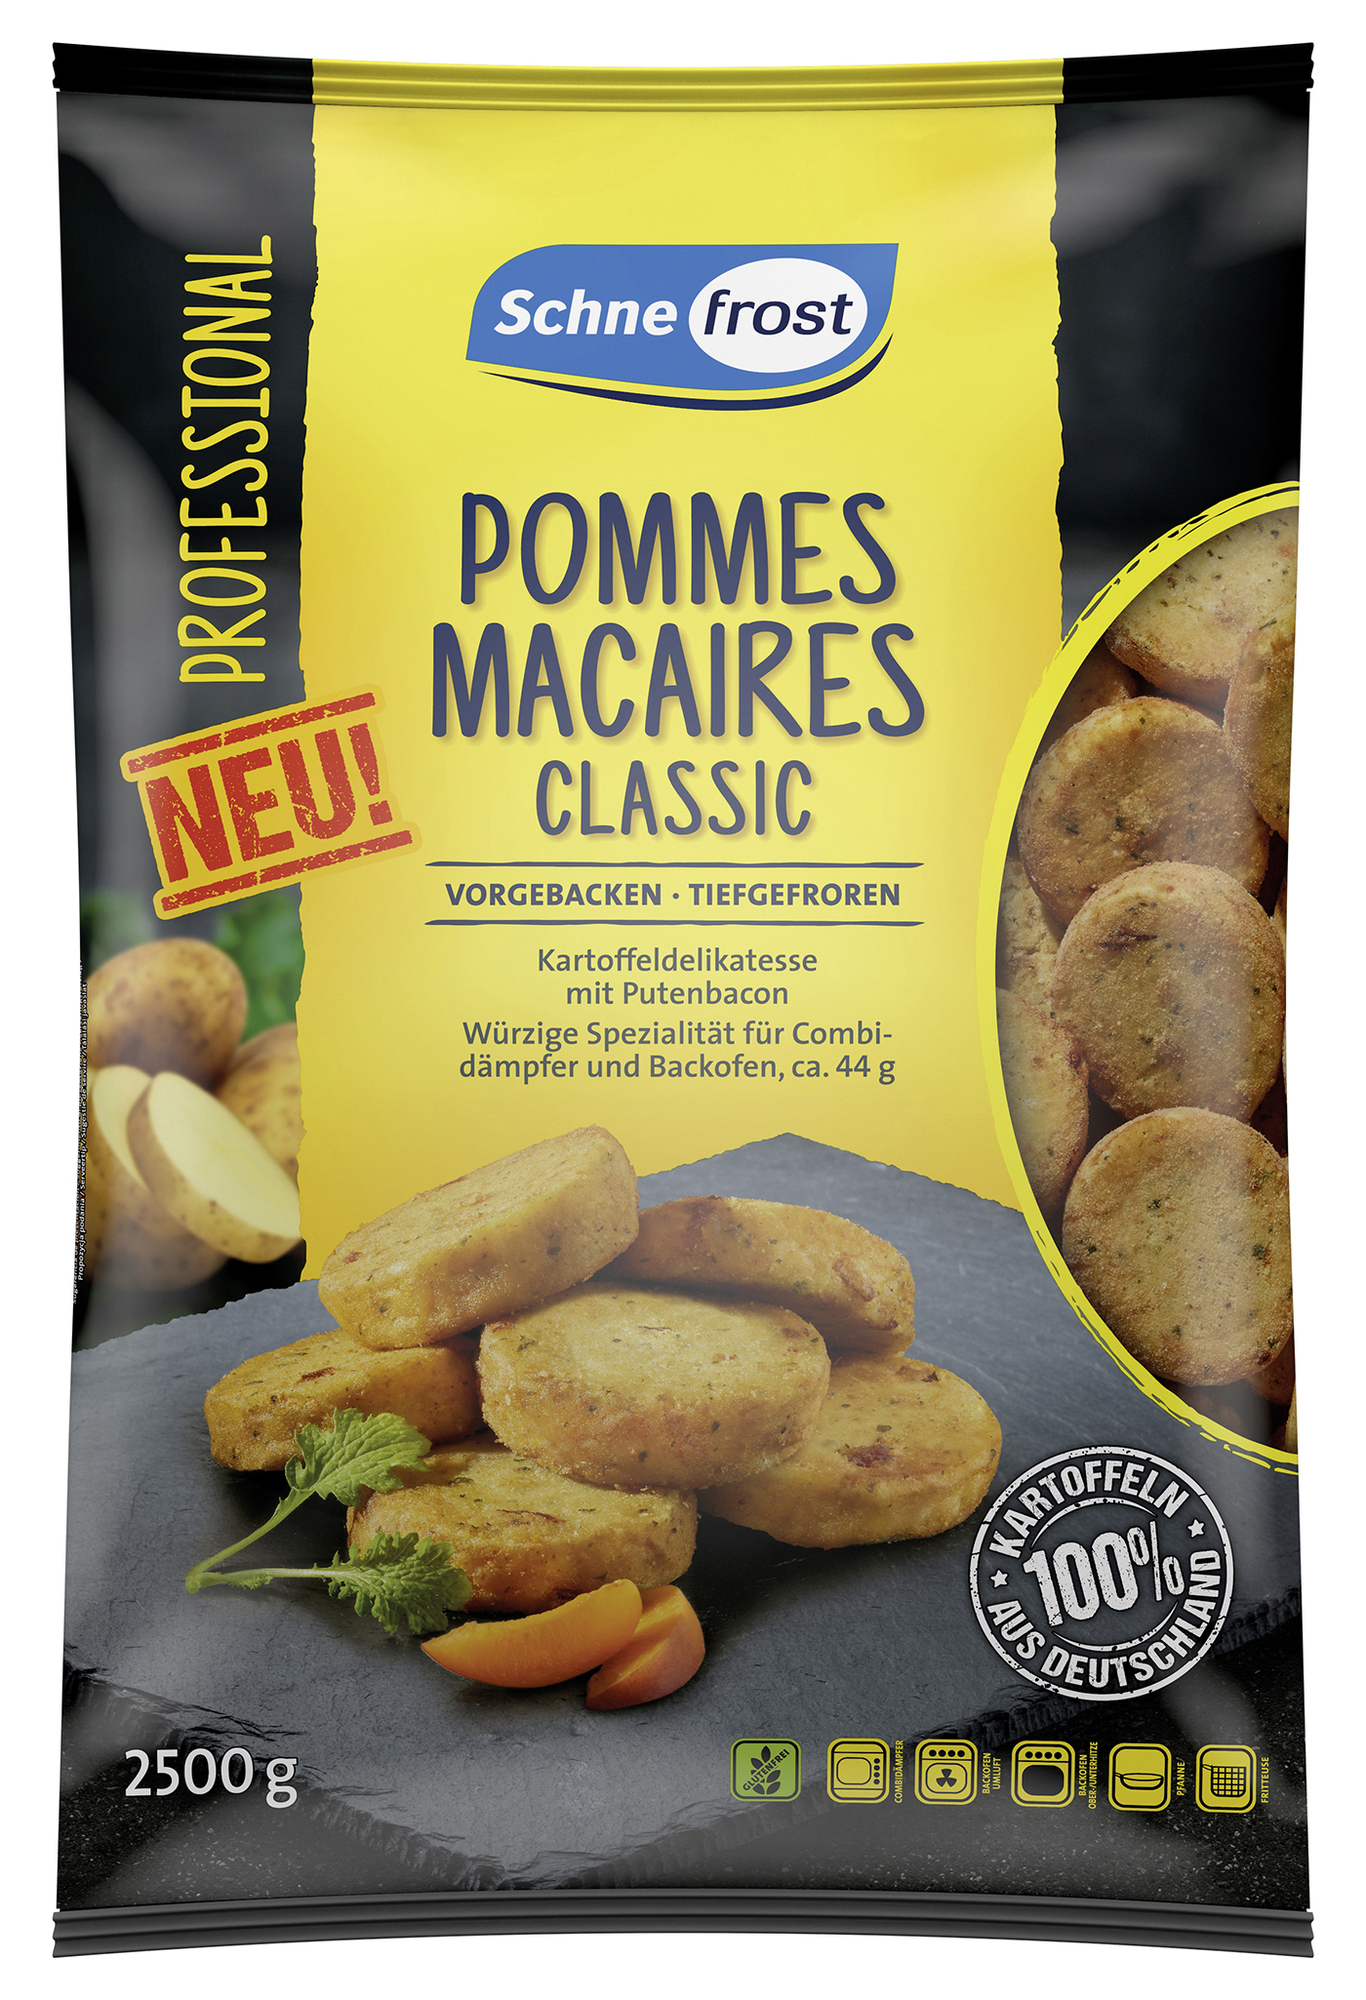 Pommes Macaires classic 2500g